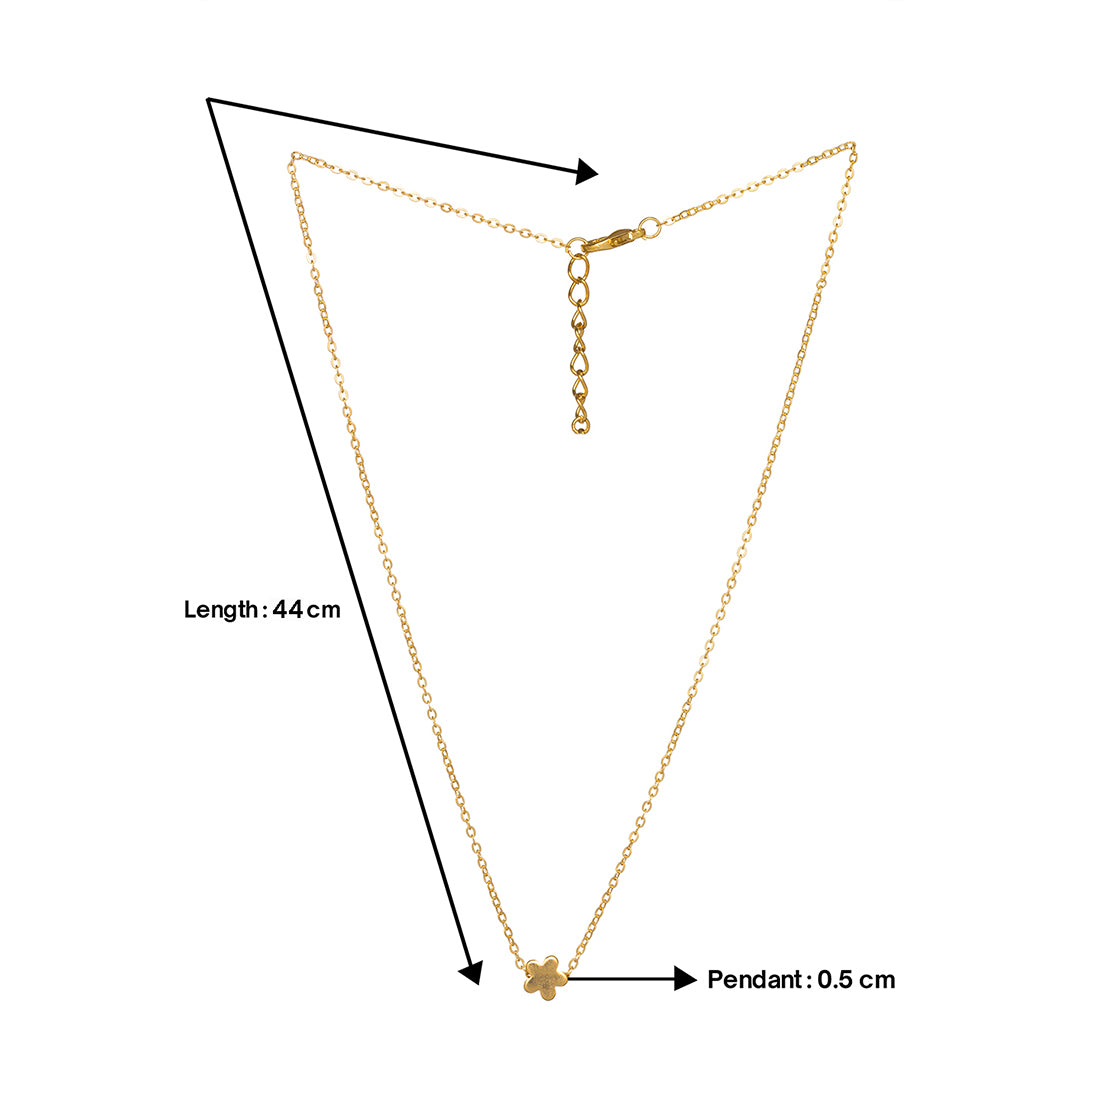 Gold-Toned Chain With Minimalist Flower Pendant